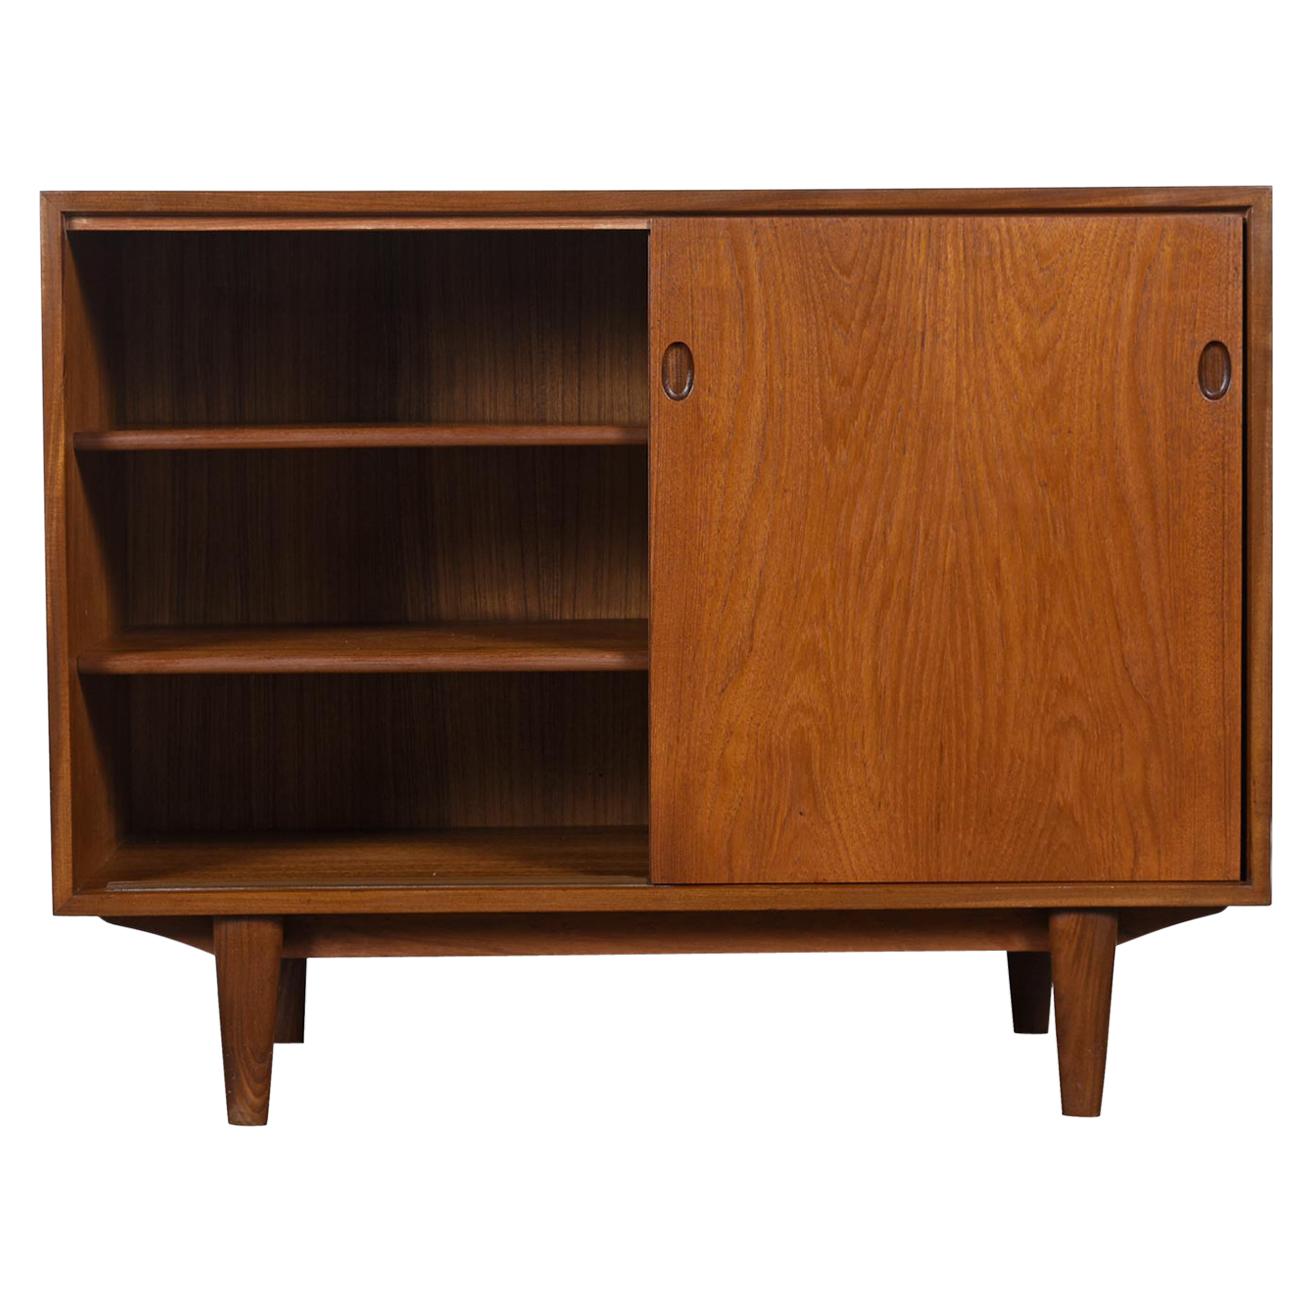 This cabinet looks exactly like other pieces designed by Arne Vodder, but it's unmarked. 

The size and proportions make this the ideal record cabinet. Large enough to display a turntable and receiver on top and tons of records inside. The deep,